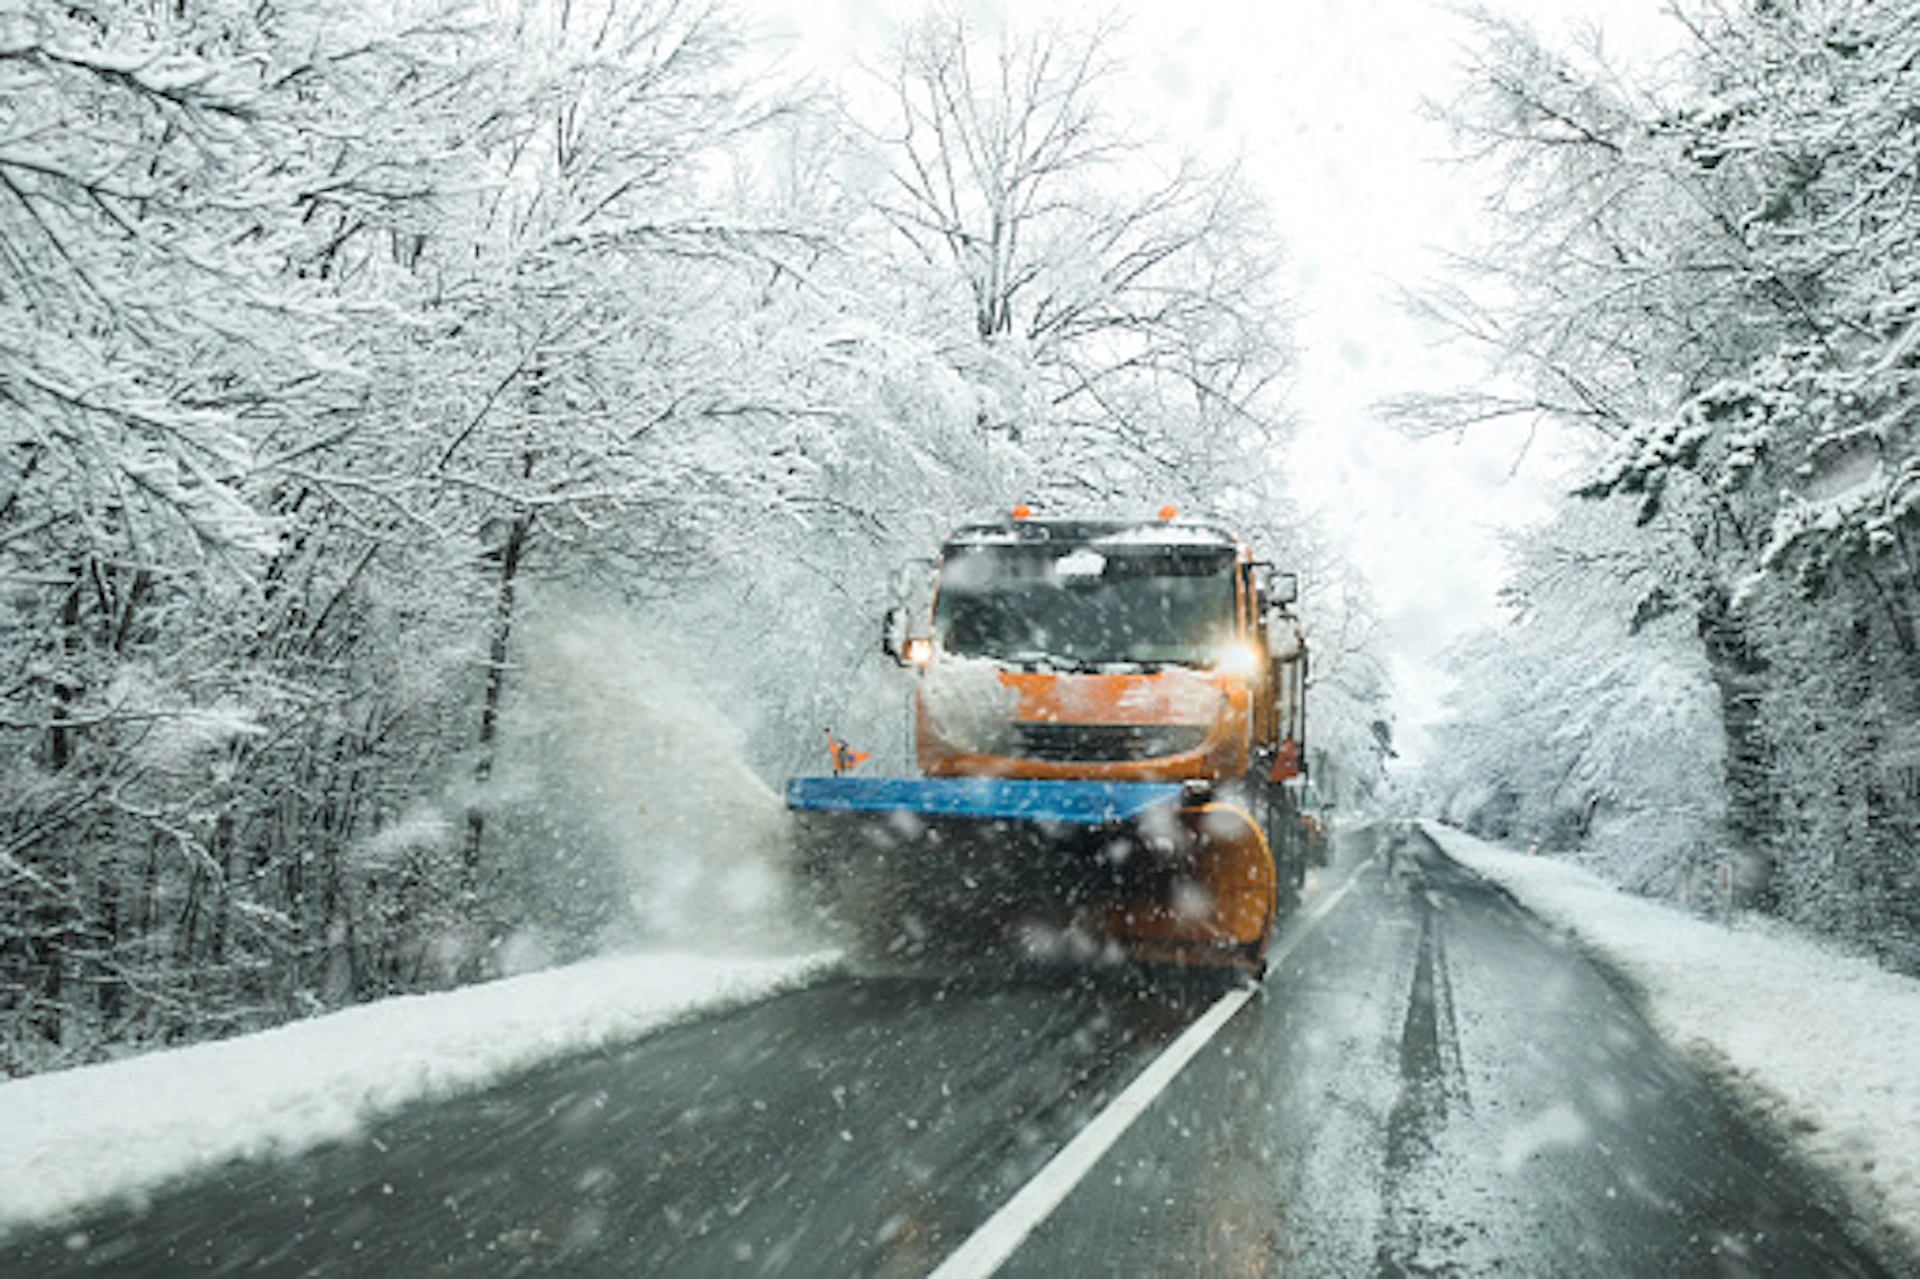 Road salt is bad for the environment. The alternative, here